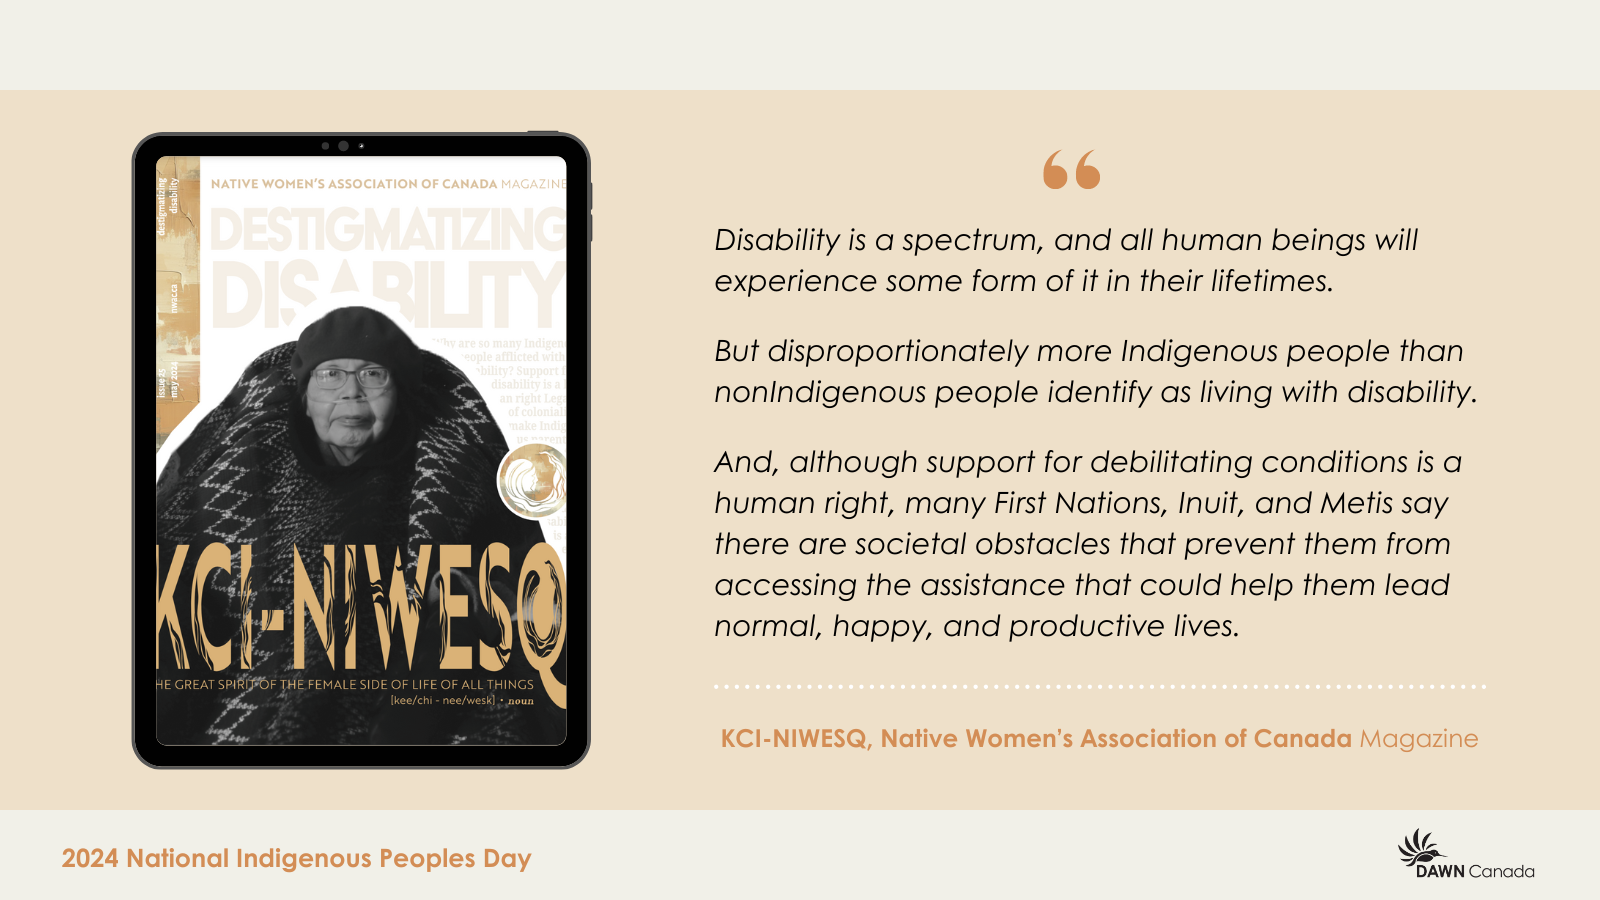 A promotional banner for National Indigenous Peoples Day by DAWN Canada featuring an electronic tablet displaying the cover from the May issue of KCI-NIWESQ, the Native Women's Association of Canada Magazine. The cover features a photo of Judi Johnny, an Indigenous disability advocate wearing a black jacket and hat. The banner includes a quote from the issue, "Disability is a spectrum, and all human beings will experience some form of it in their lifetimes. But disproportionately more Indigenous people than non-Indigenous people identify as living with disability. Although support for celebrating conditions is a human right, many First Nations, Inuit, and Métis say there are societal actions that prevent them from accessing the assistance that could help them lead normal, happy, and productive lives."